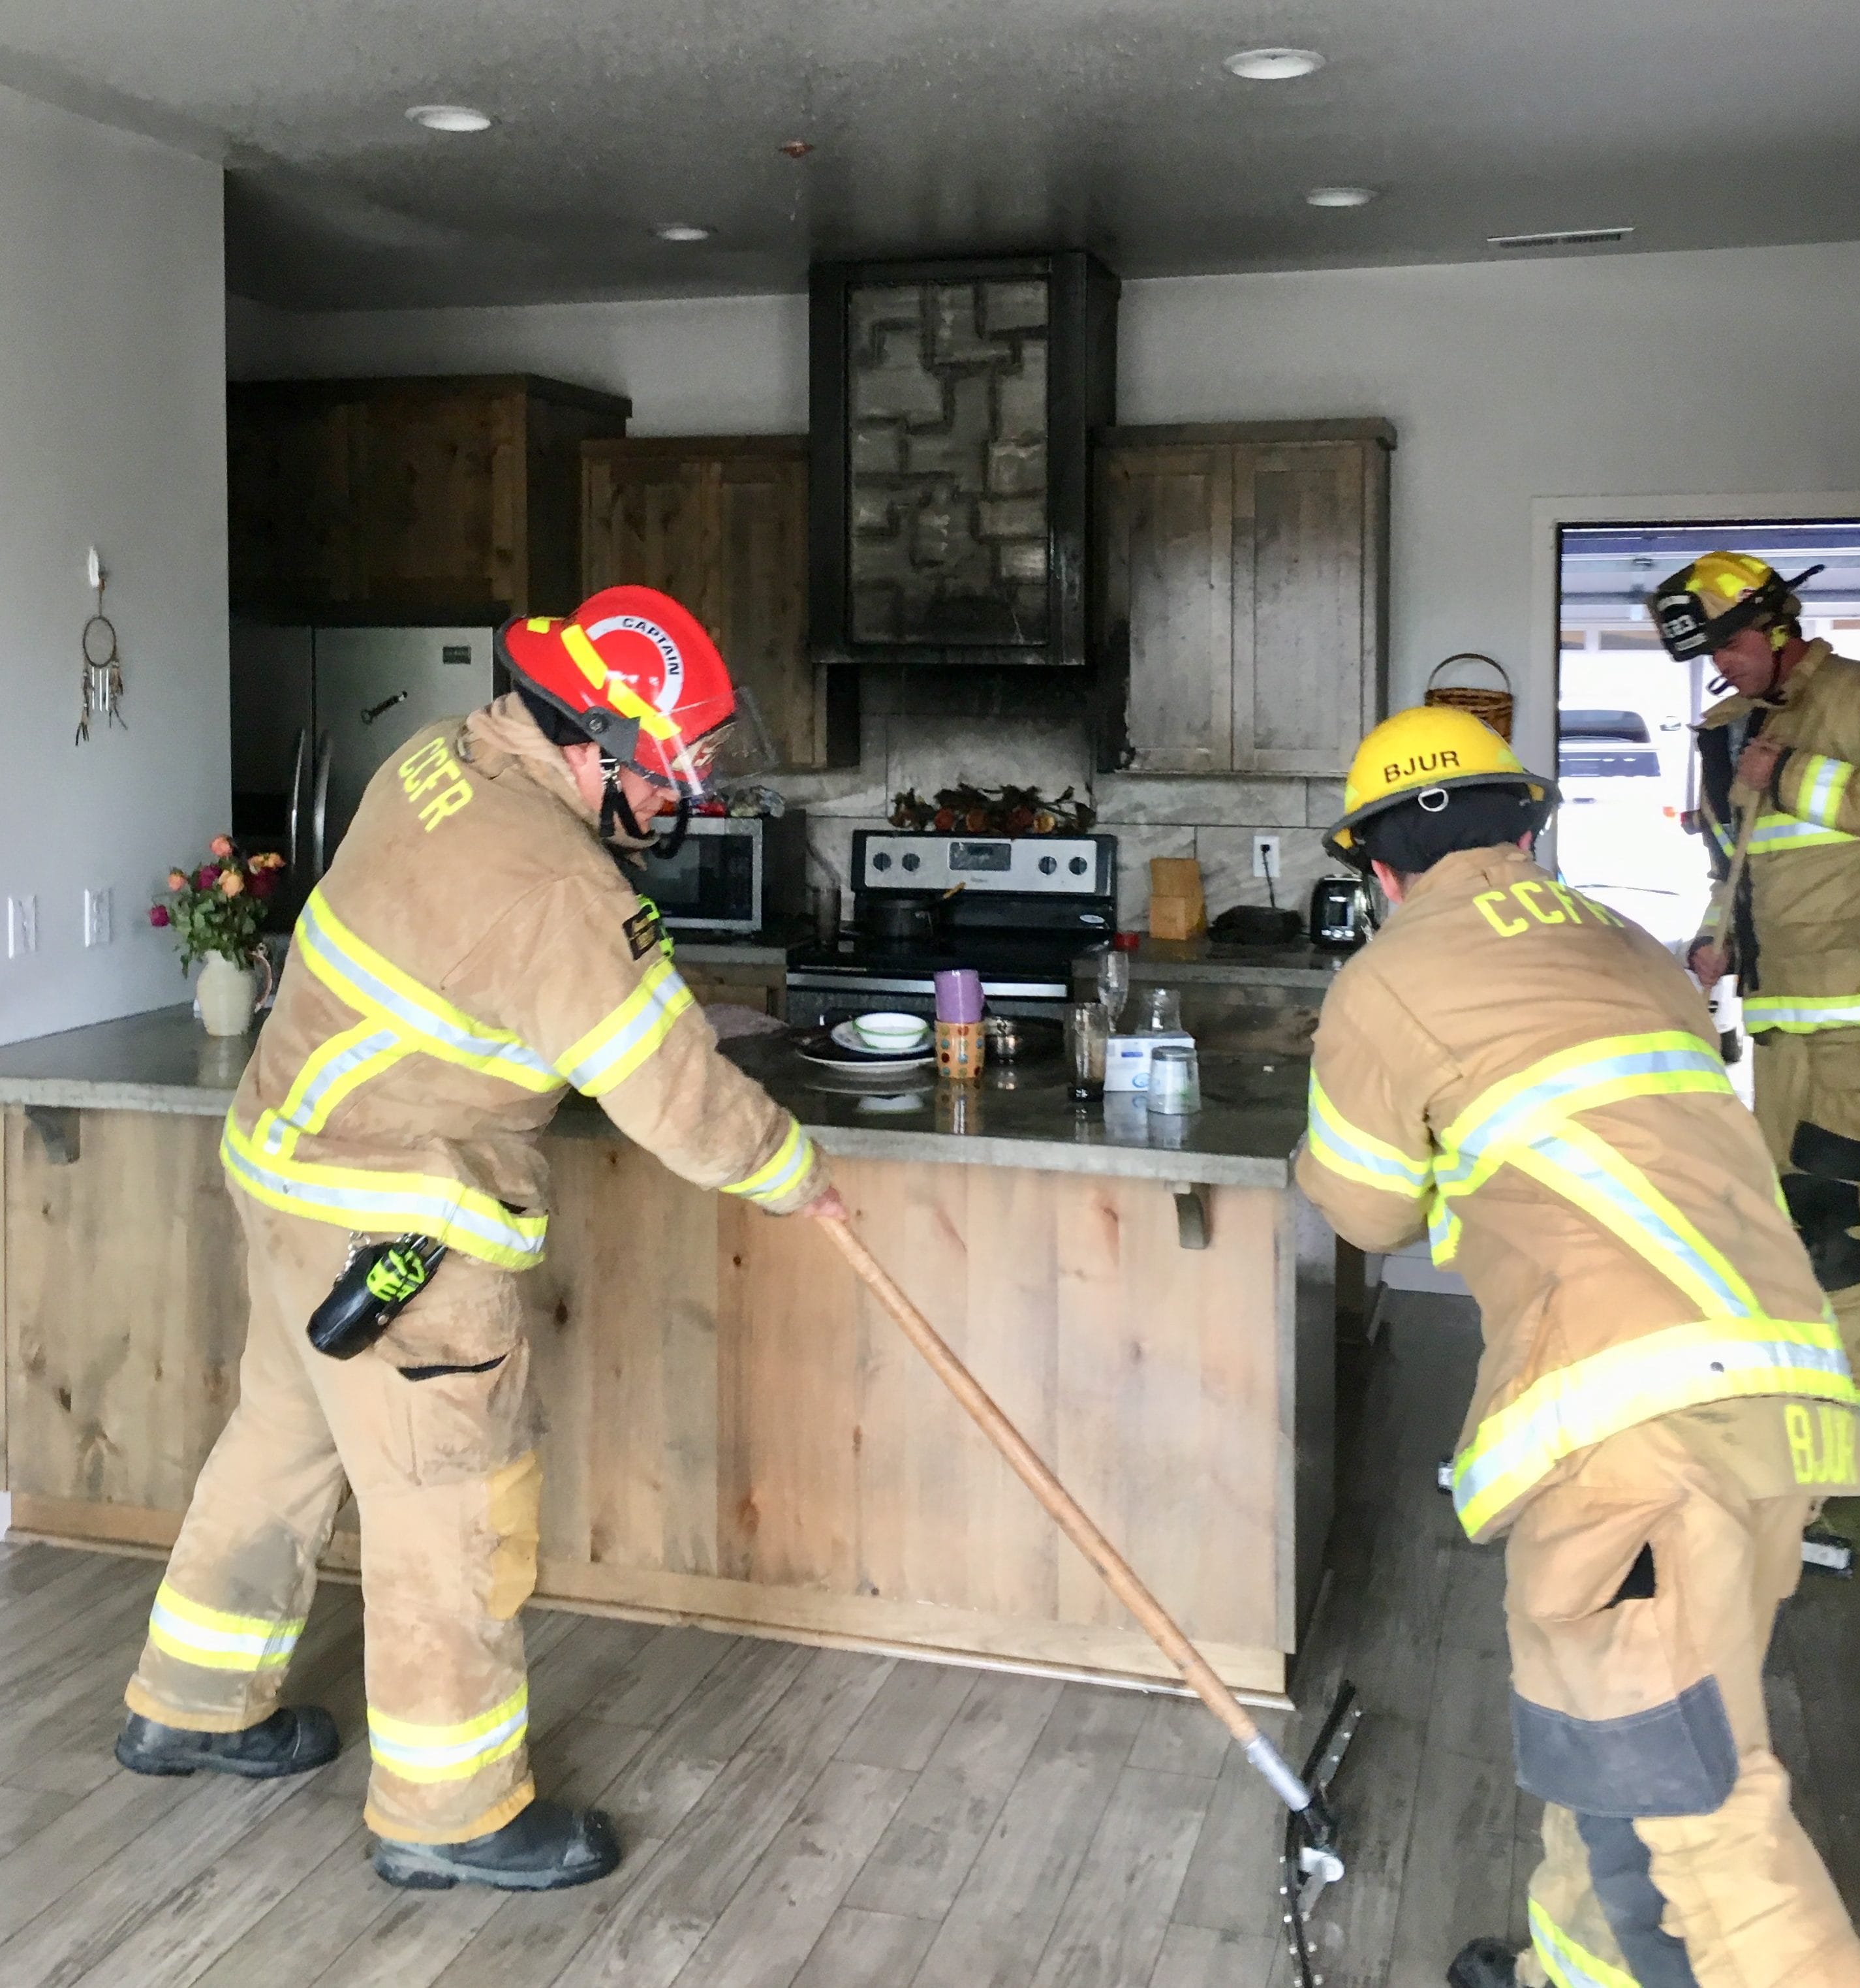 Firefighters clean up after a cooking fire Thursday morning at a Ridgefield condominium. The blaze was contained by a fire sprinkler system.